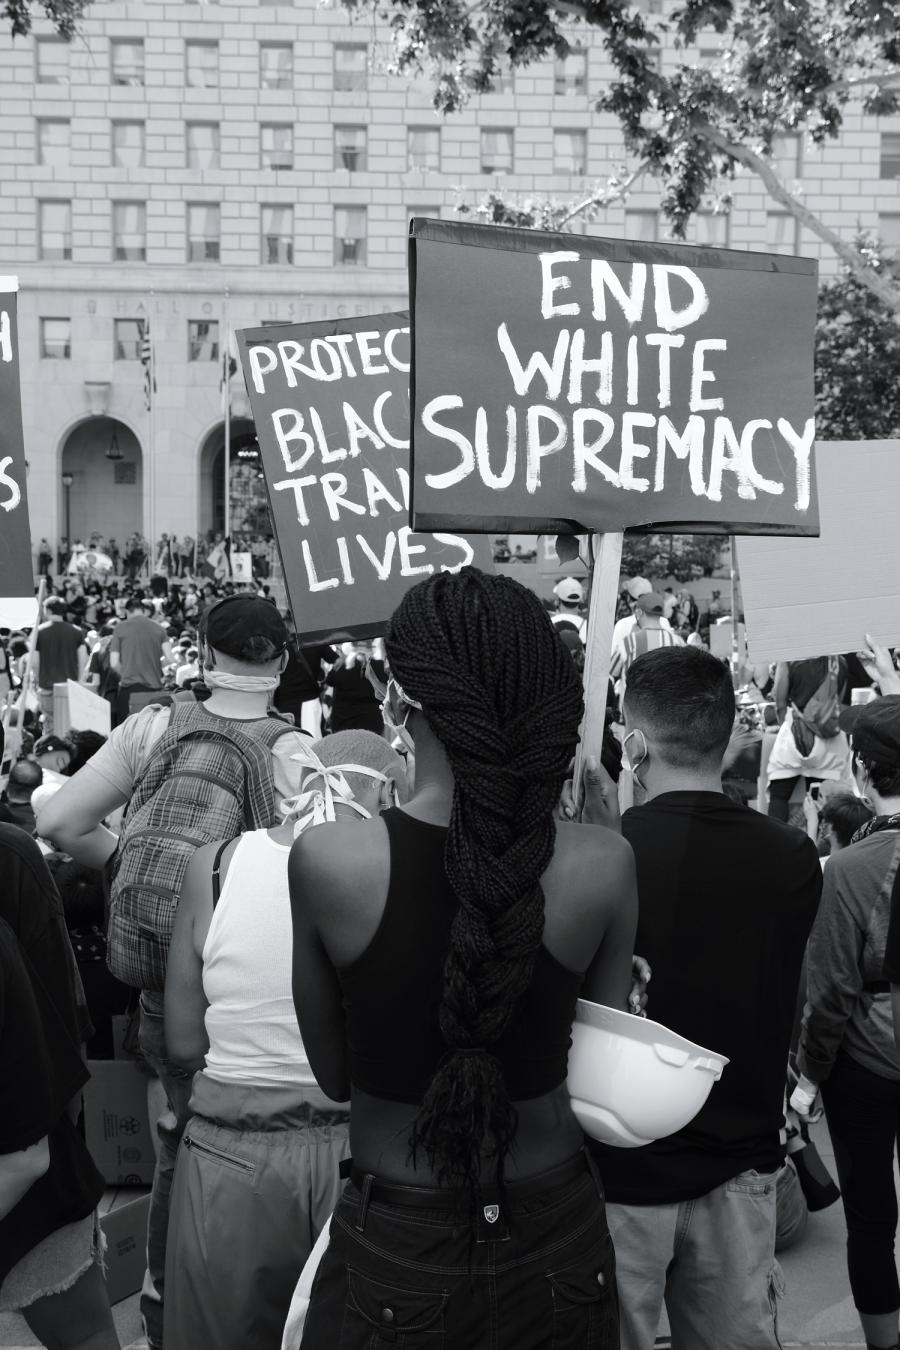 Group protest with sign "end white supremacy"